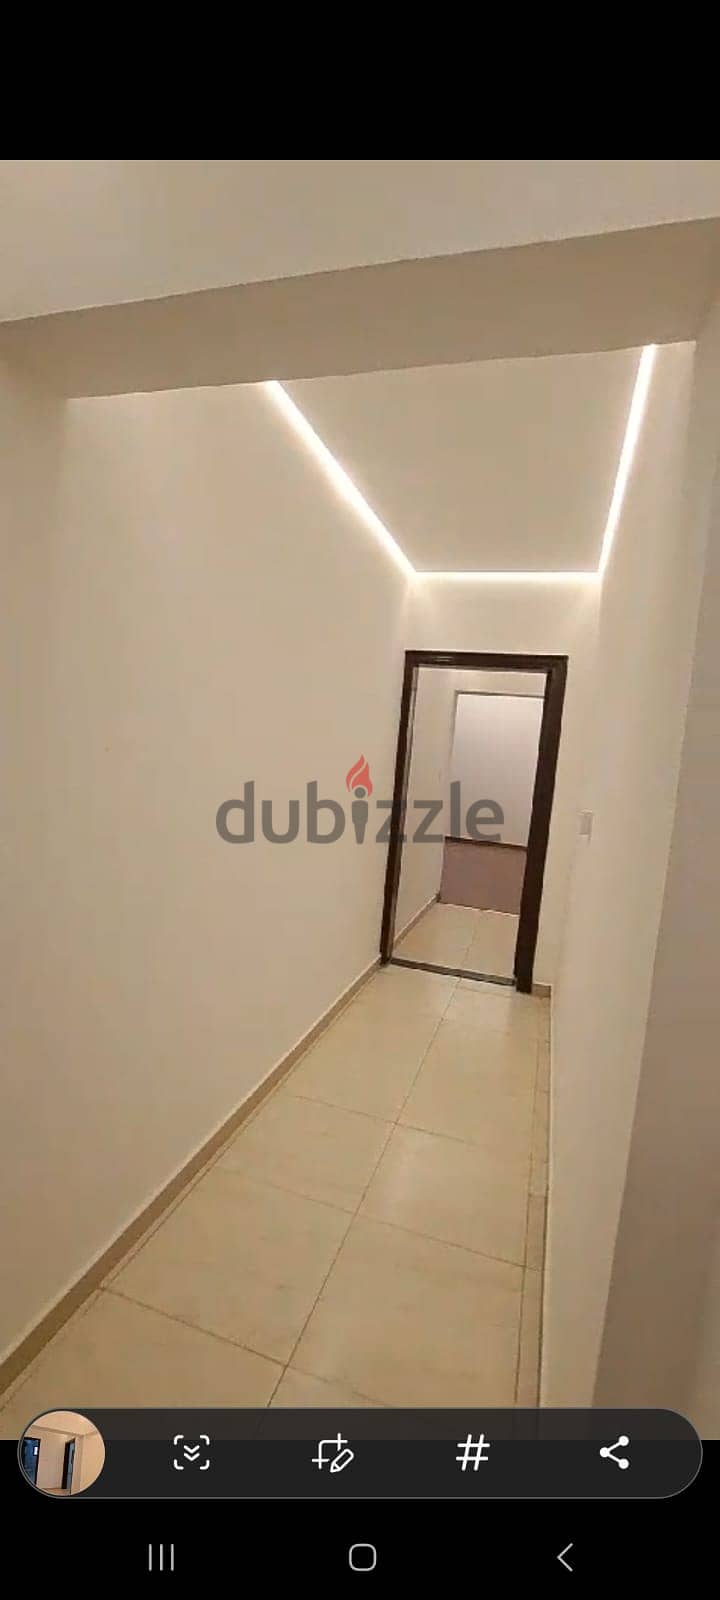 For rent flat (Ground floor apartment) in compound in Al Nasr 3bhk 18